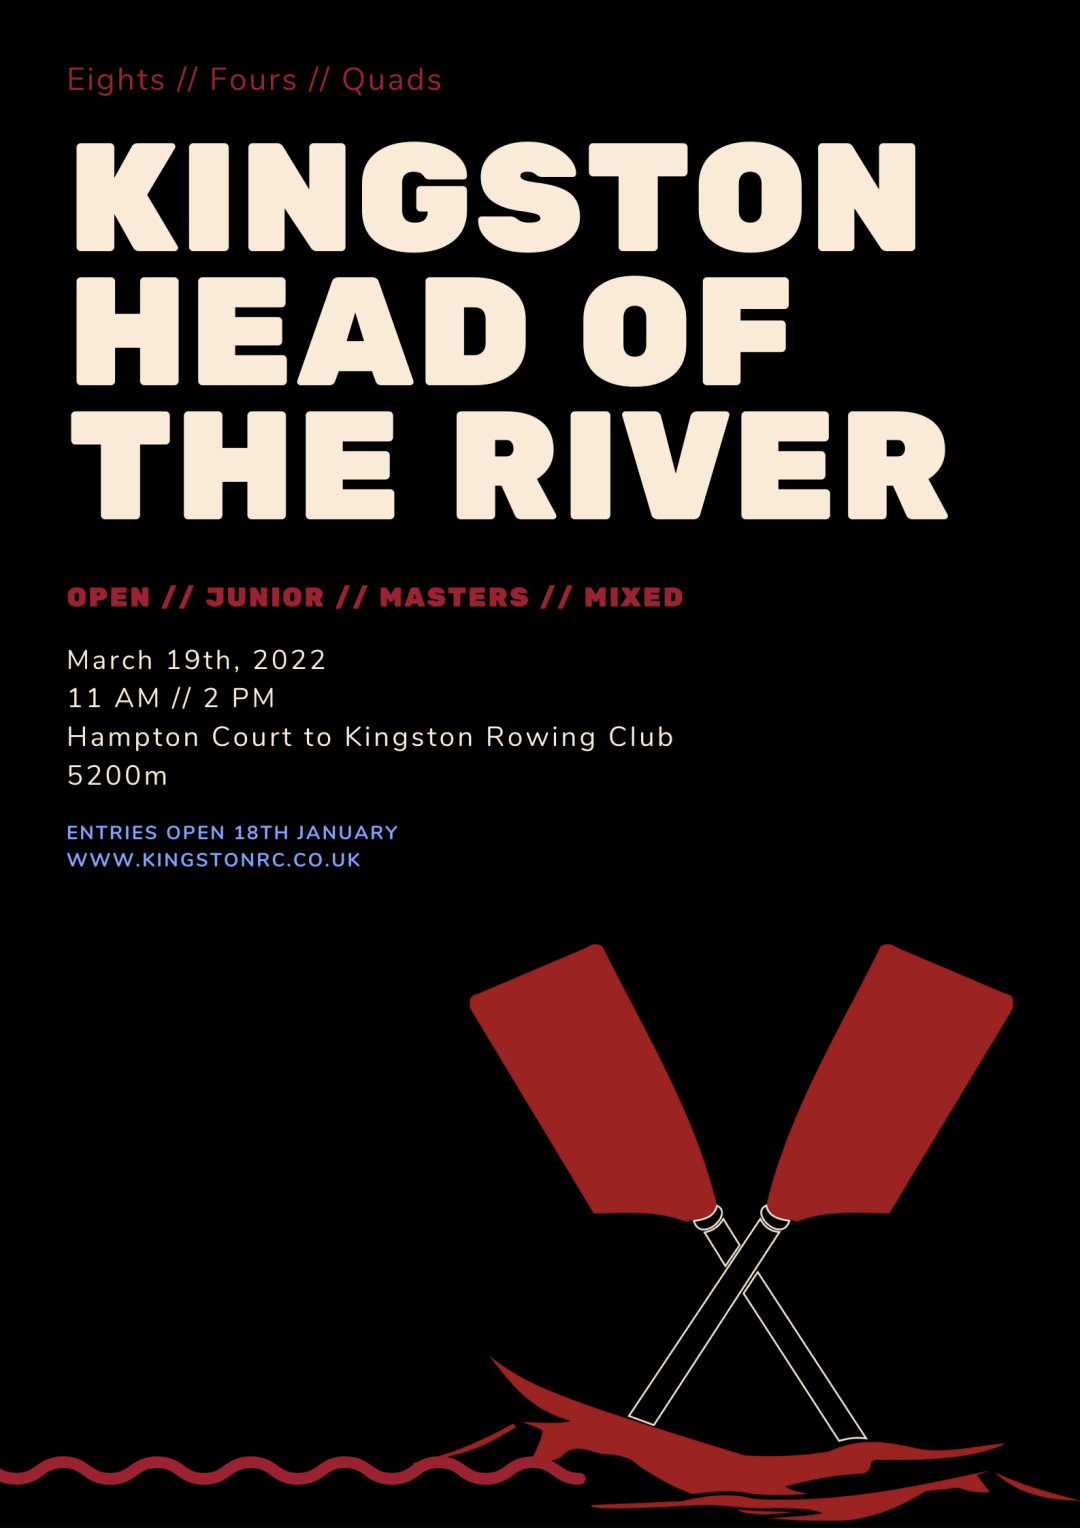 An black event poster with crossed red oars at the bottom. The poster reads "Eights // Fours // Quads, Kingston Head of the River, Open // Junior // Masters // Mixed, March 19th 2022, 11am // 2pm, Hampton Court to Kingston Rowing Club, 5200m, Register today at www.kingstonrc.co.uk"